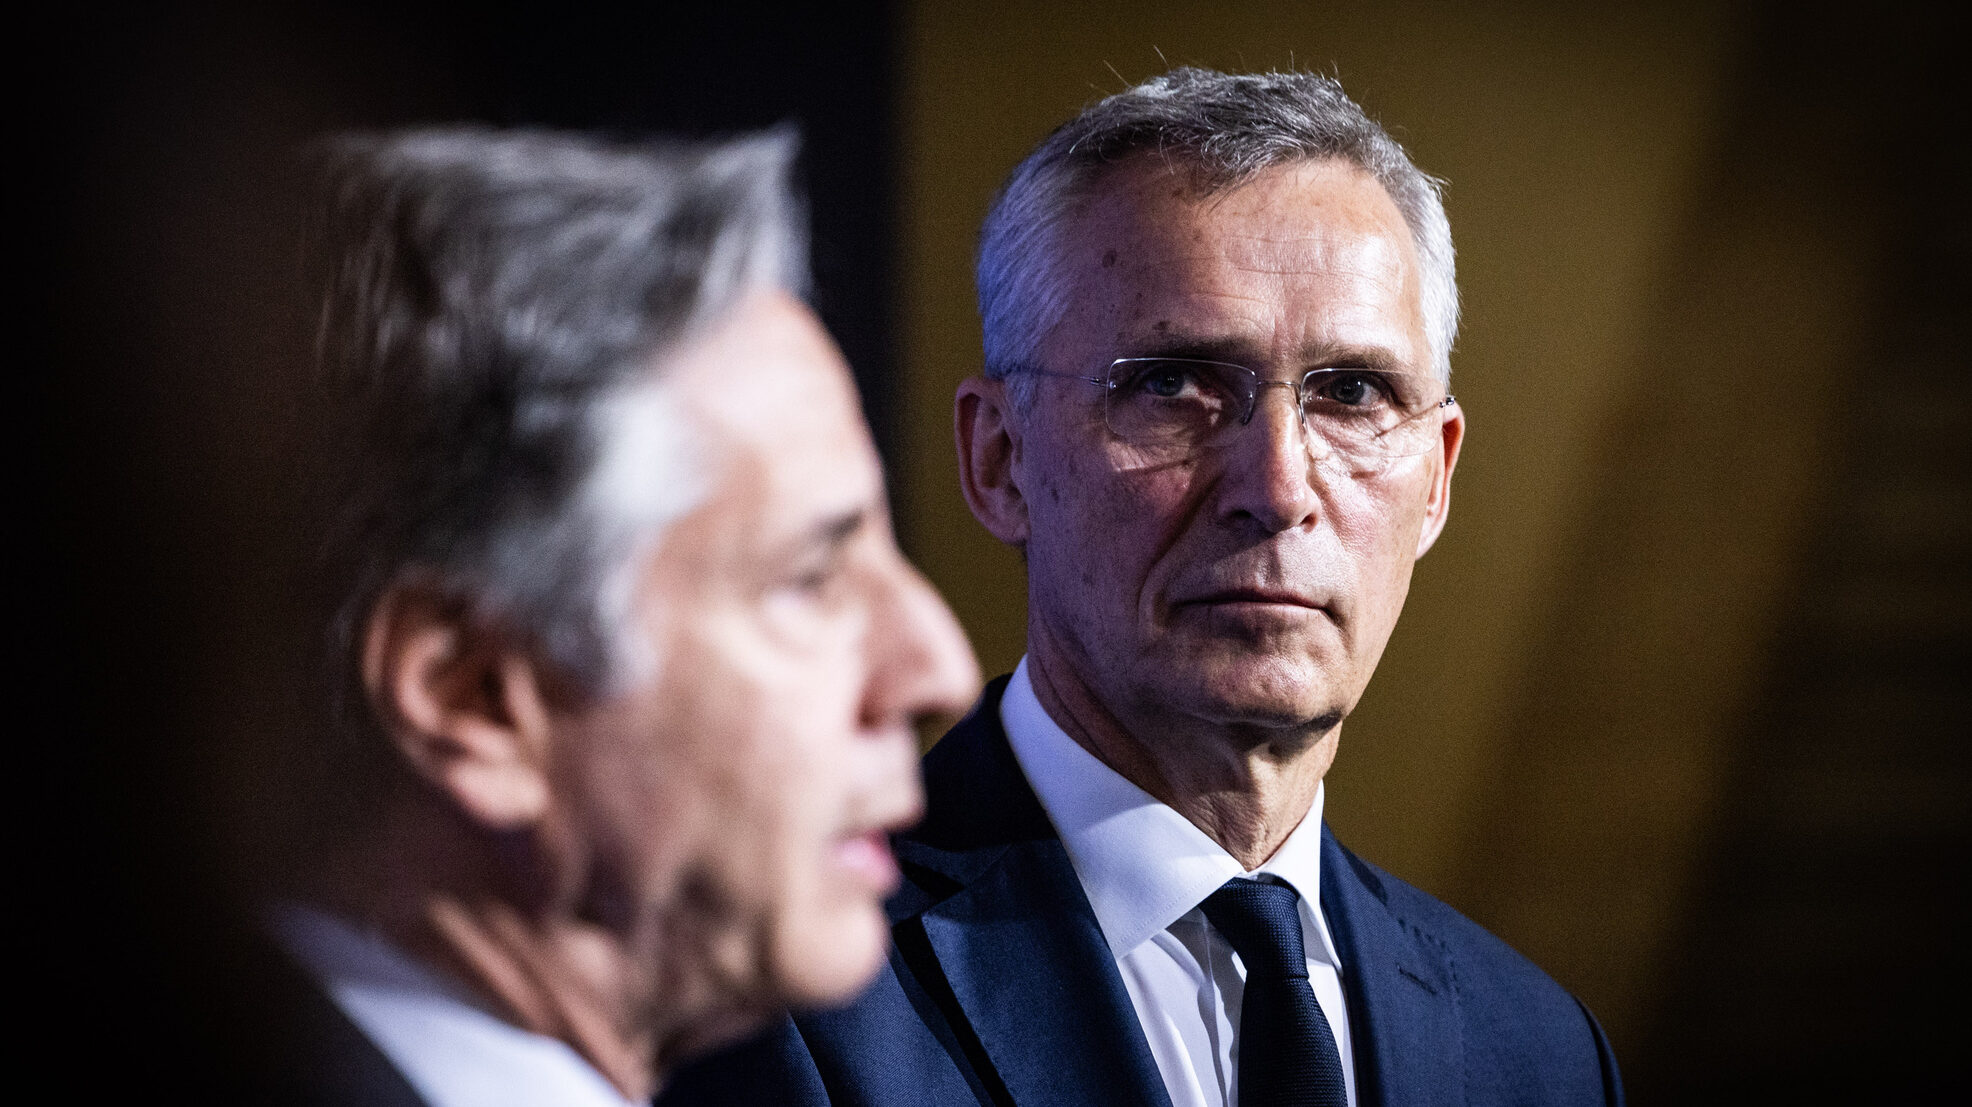 Remarks by the NATO Secretary General and the US Secretary of State – Informal meeting of NATO Ministers of Foreign Affairs